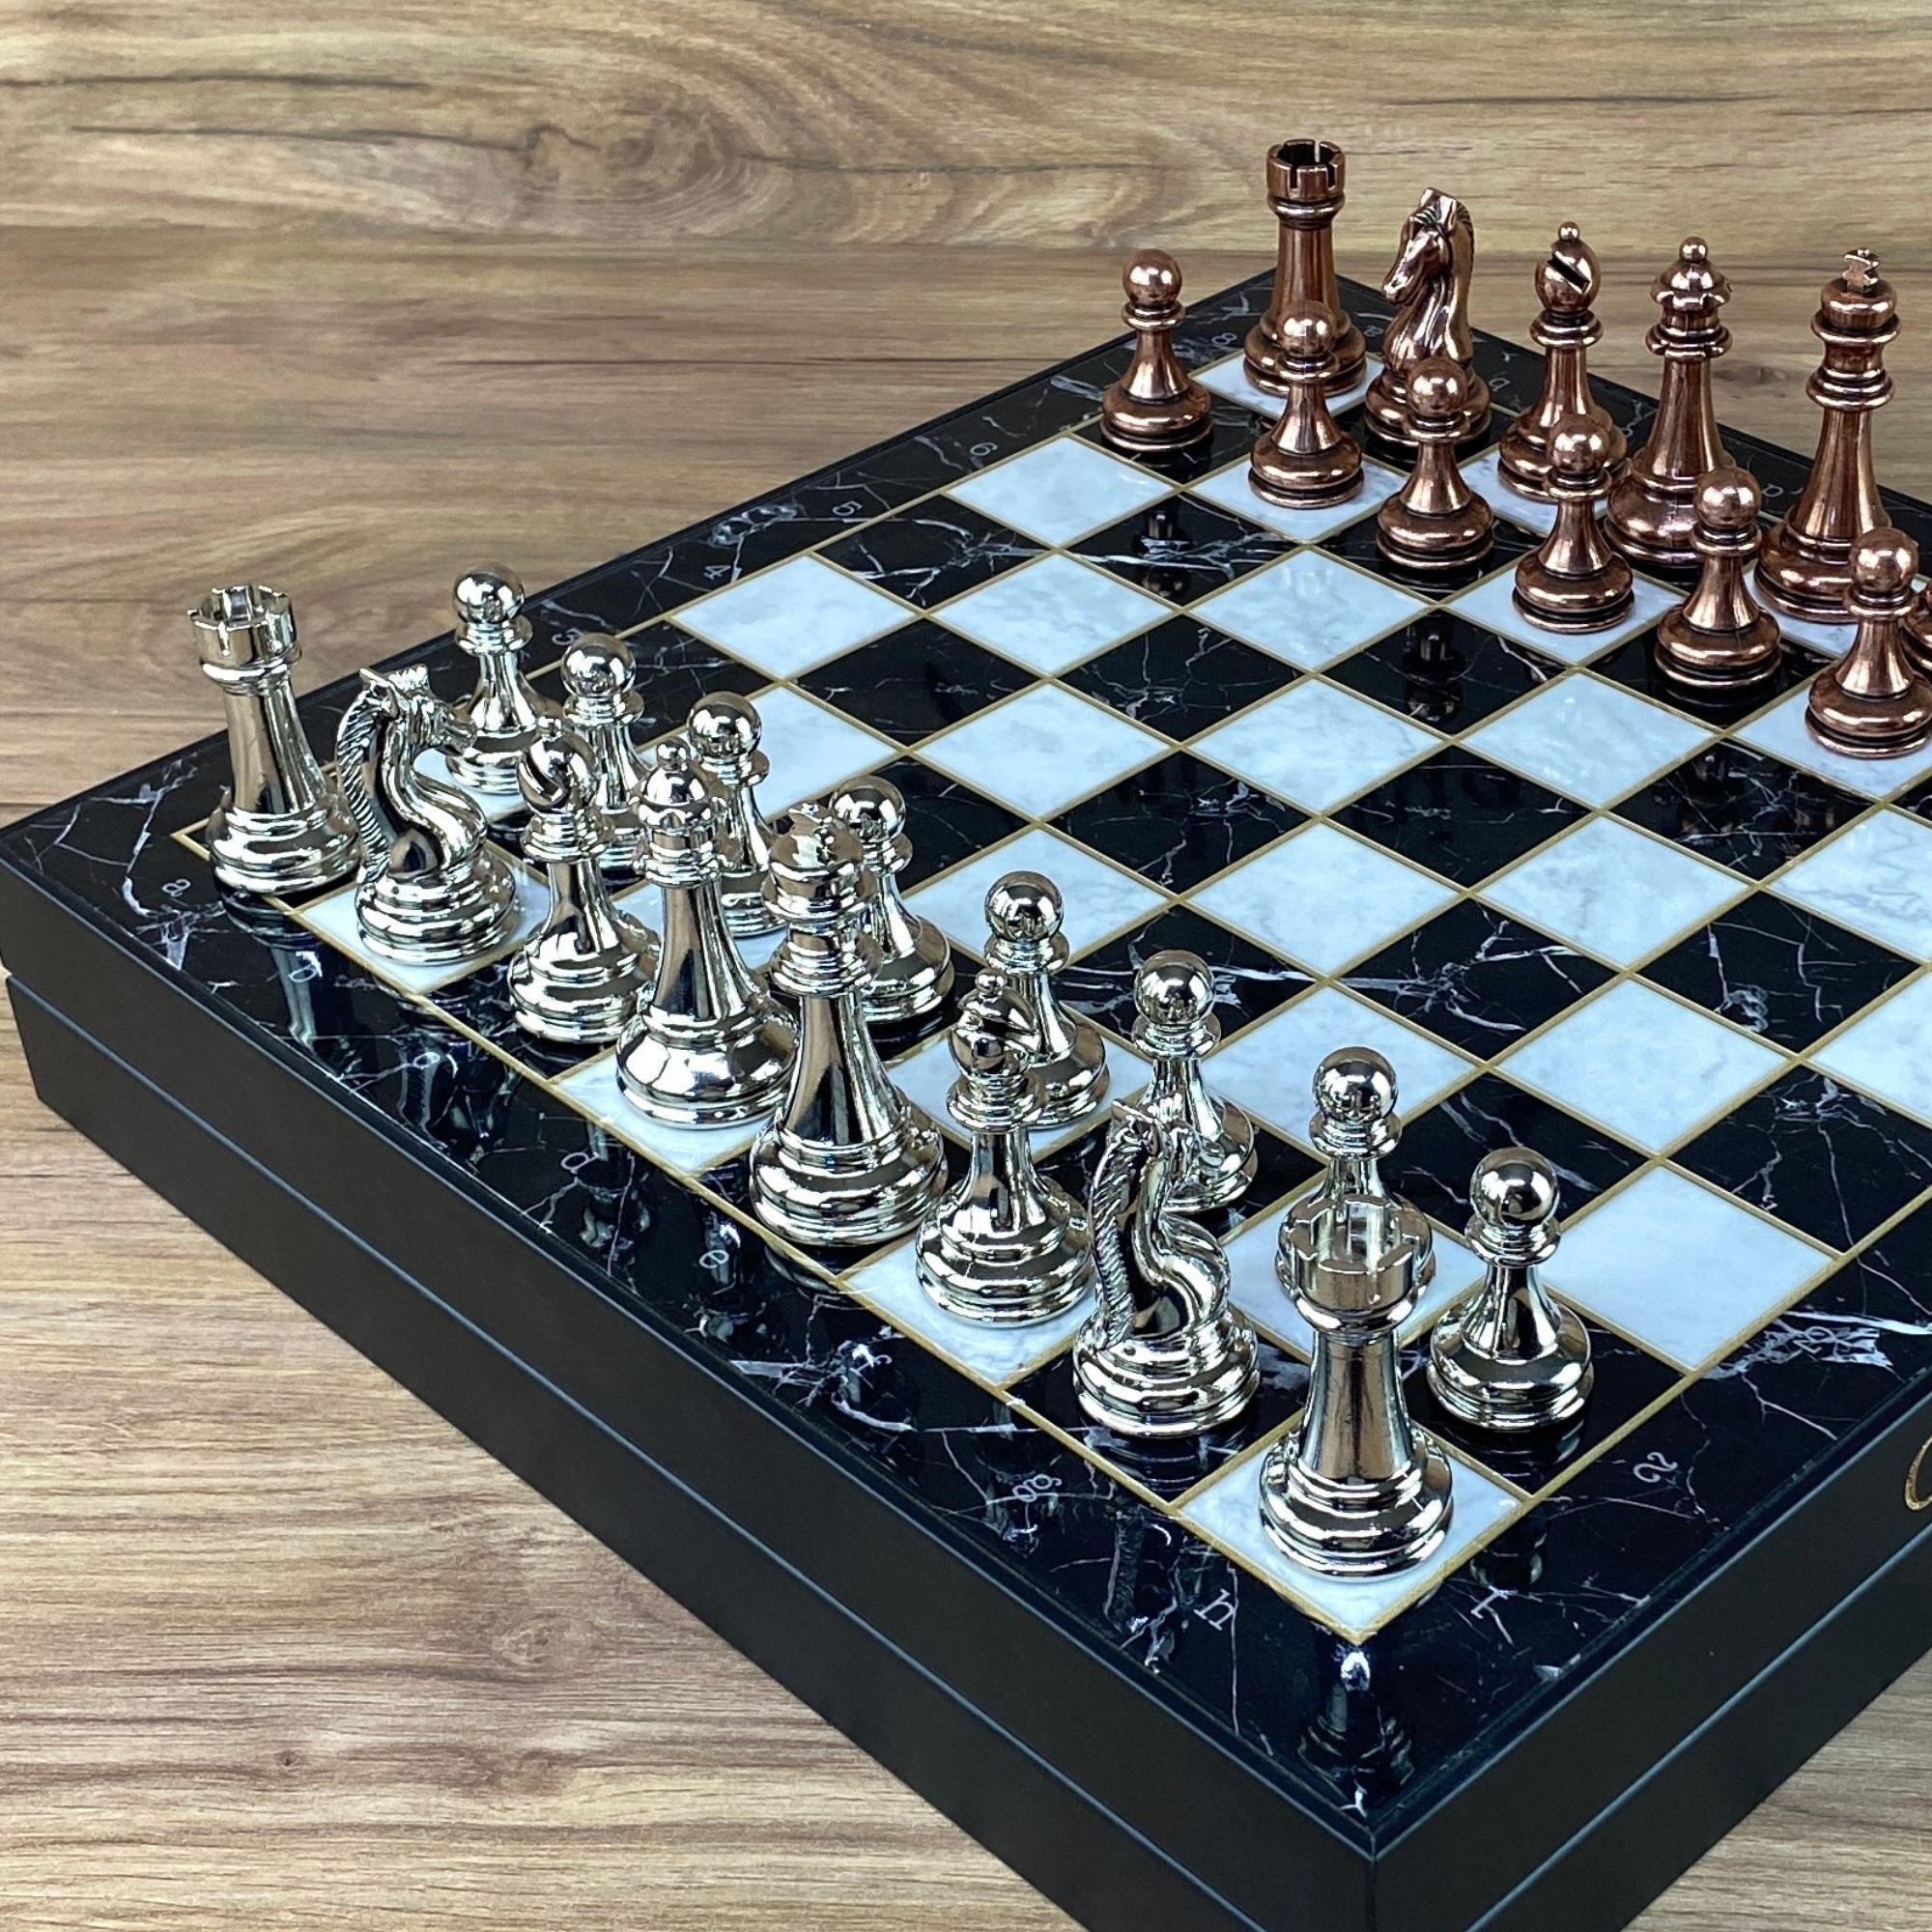  Large Personalized Chess Set - Boxed Custom Chess Board and  Metal Chess Figures Set - Gift Idea for Son, Husband, Father - 2 Sizes  (Large 14.2x14.2) : Toys & Games